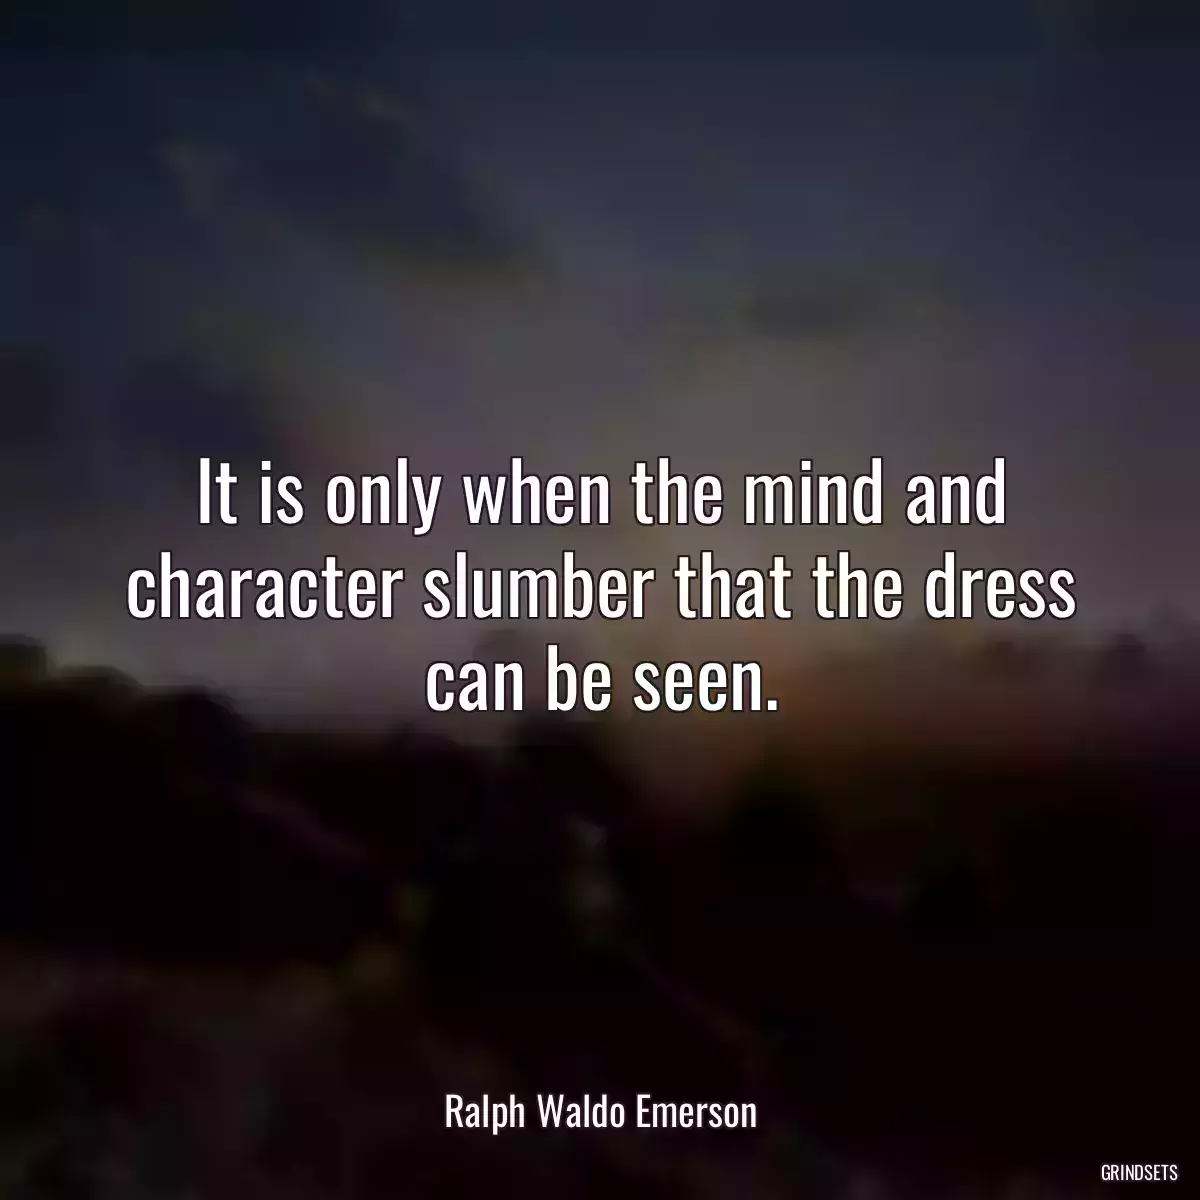 It is only when the mind and character slumber that the dress can be seen.